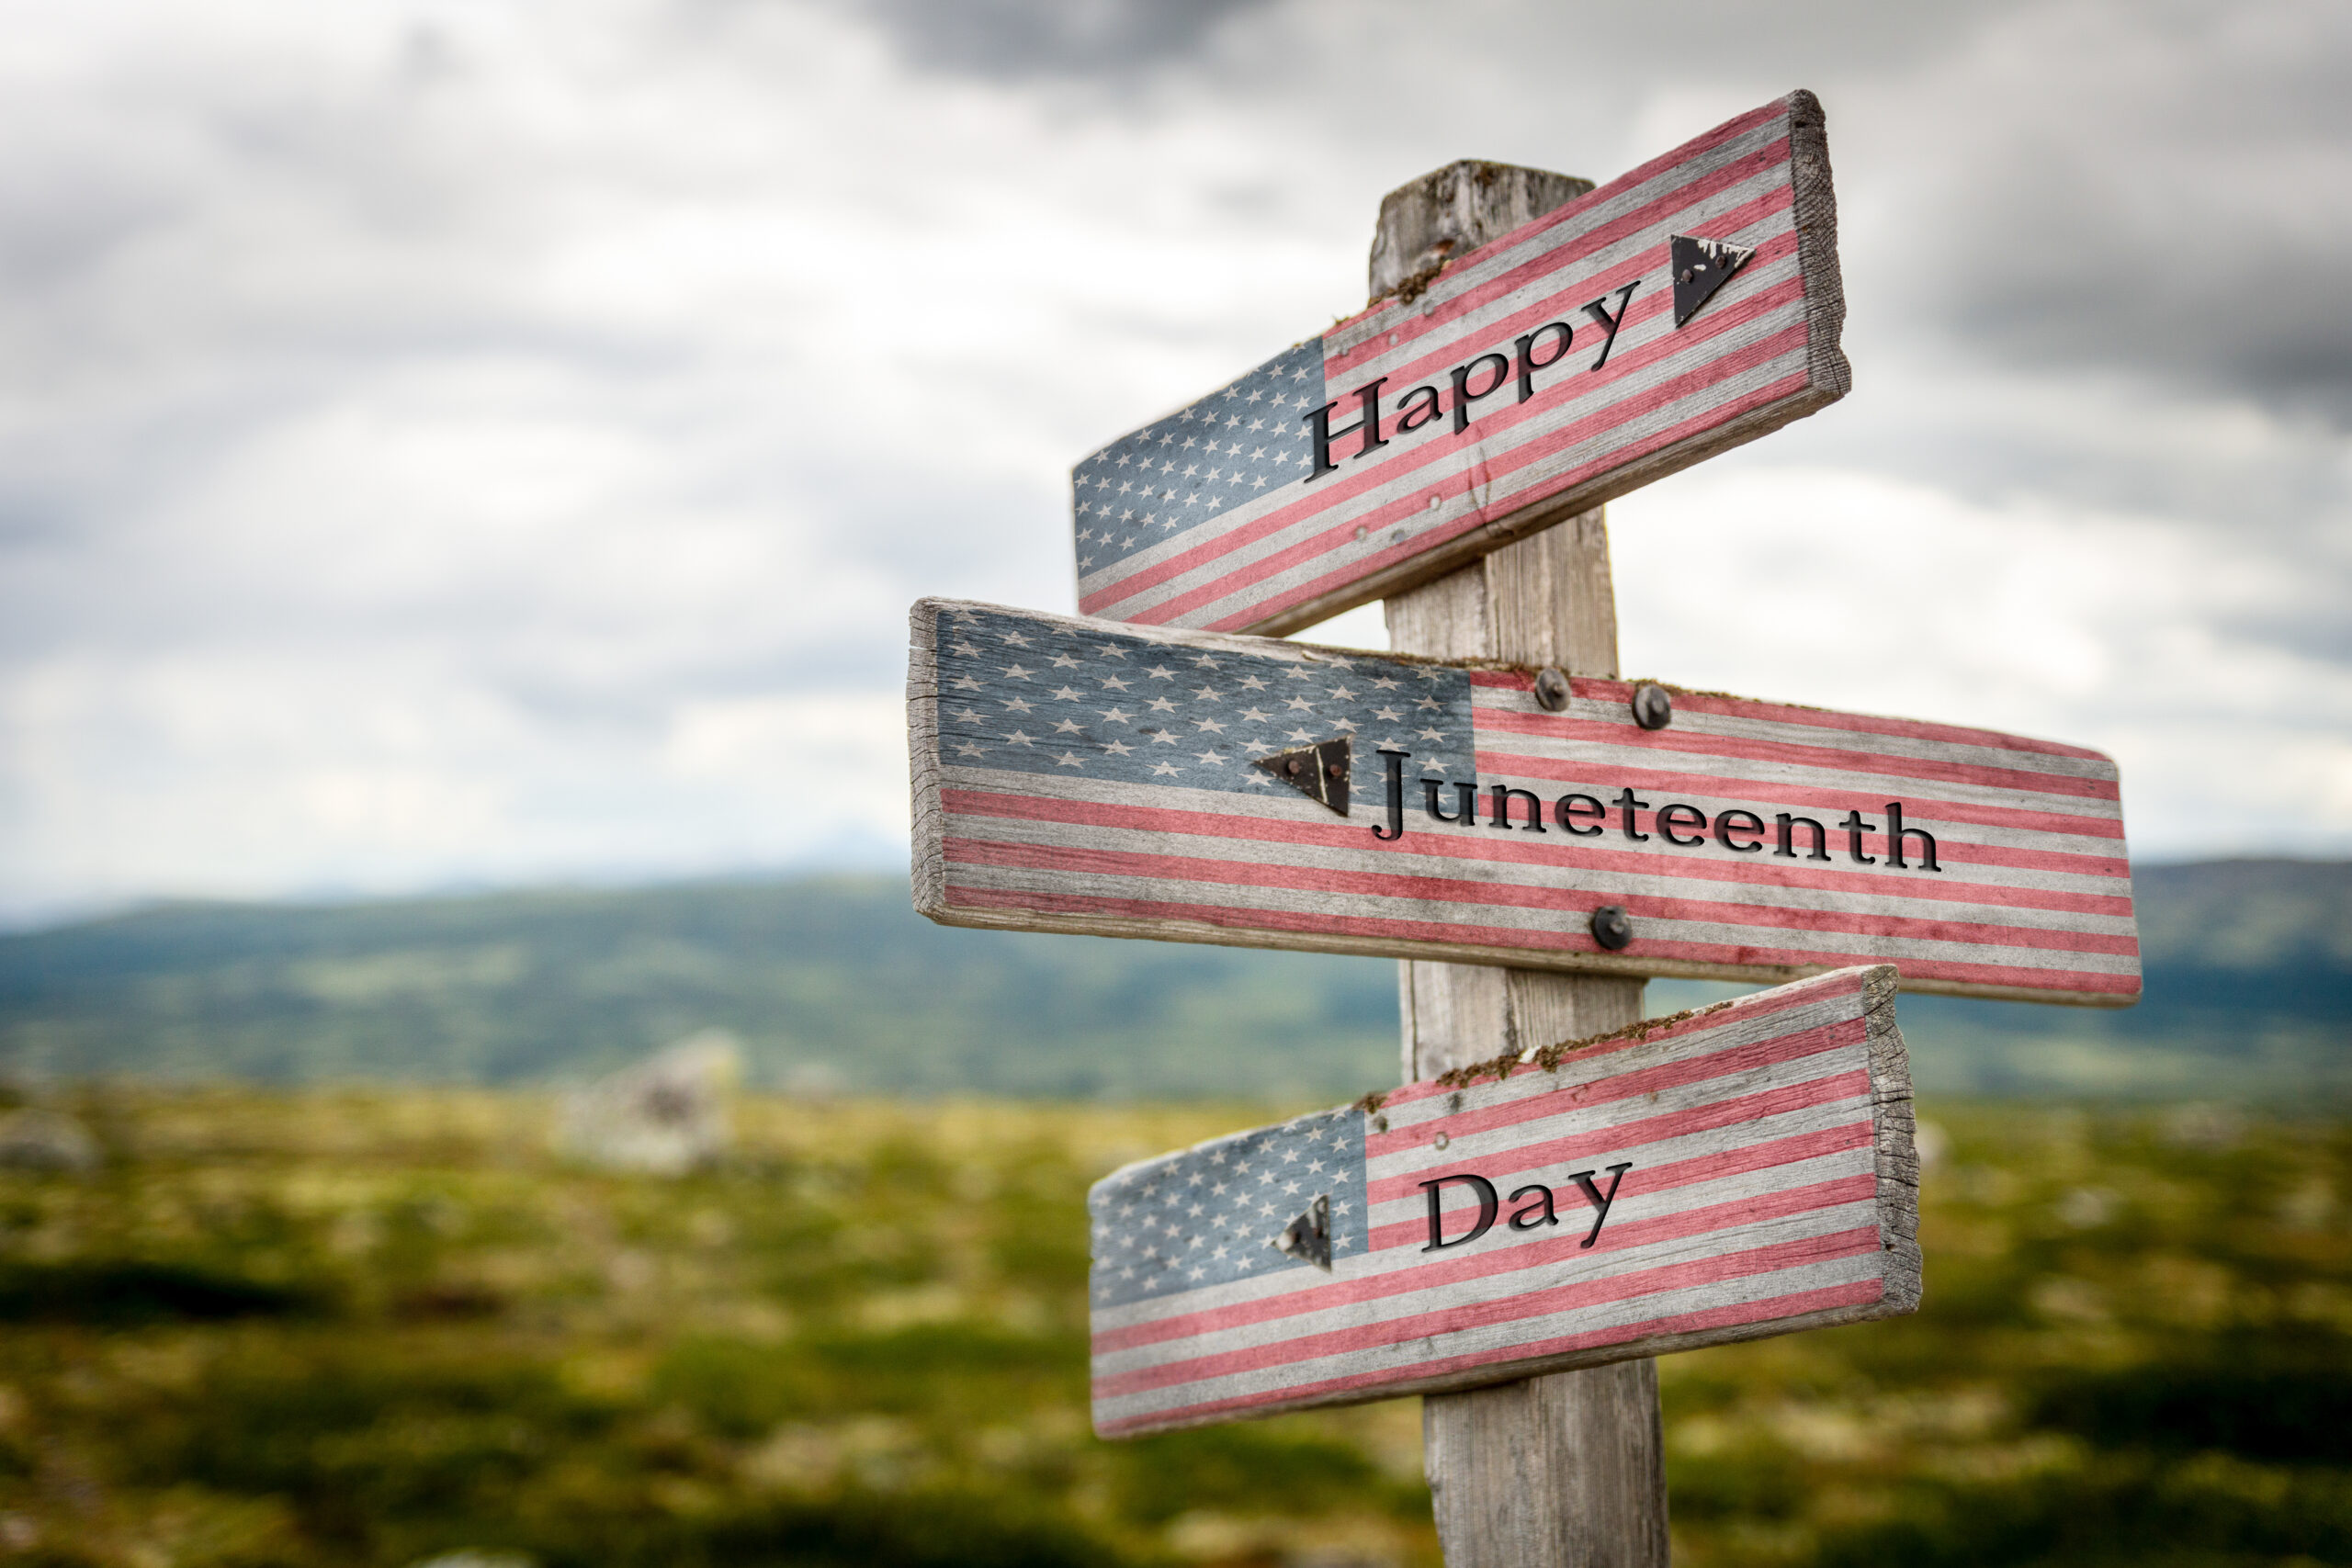 Happy juneteenth day text on wooden american flag signpost